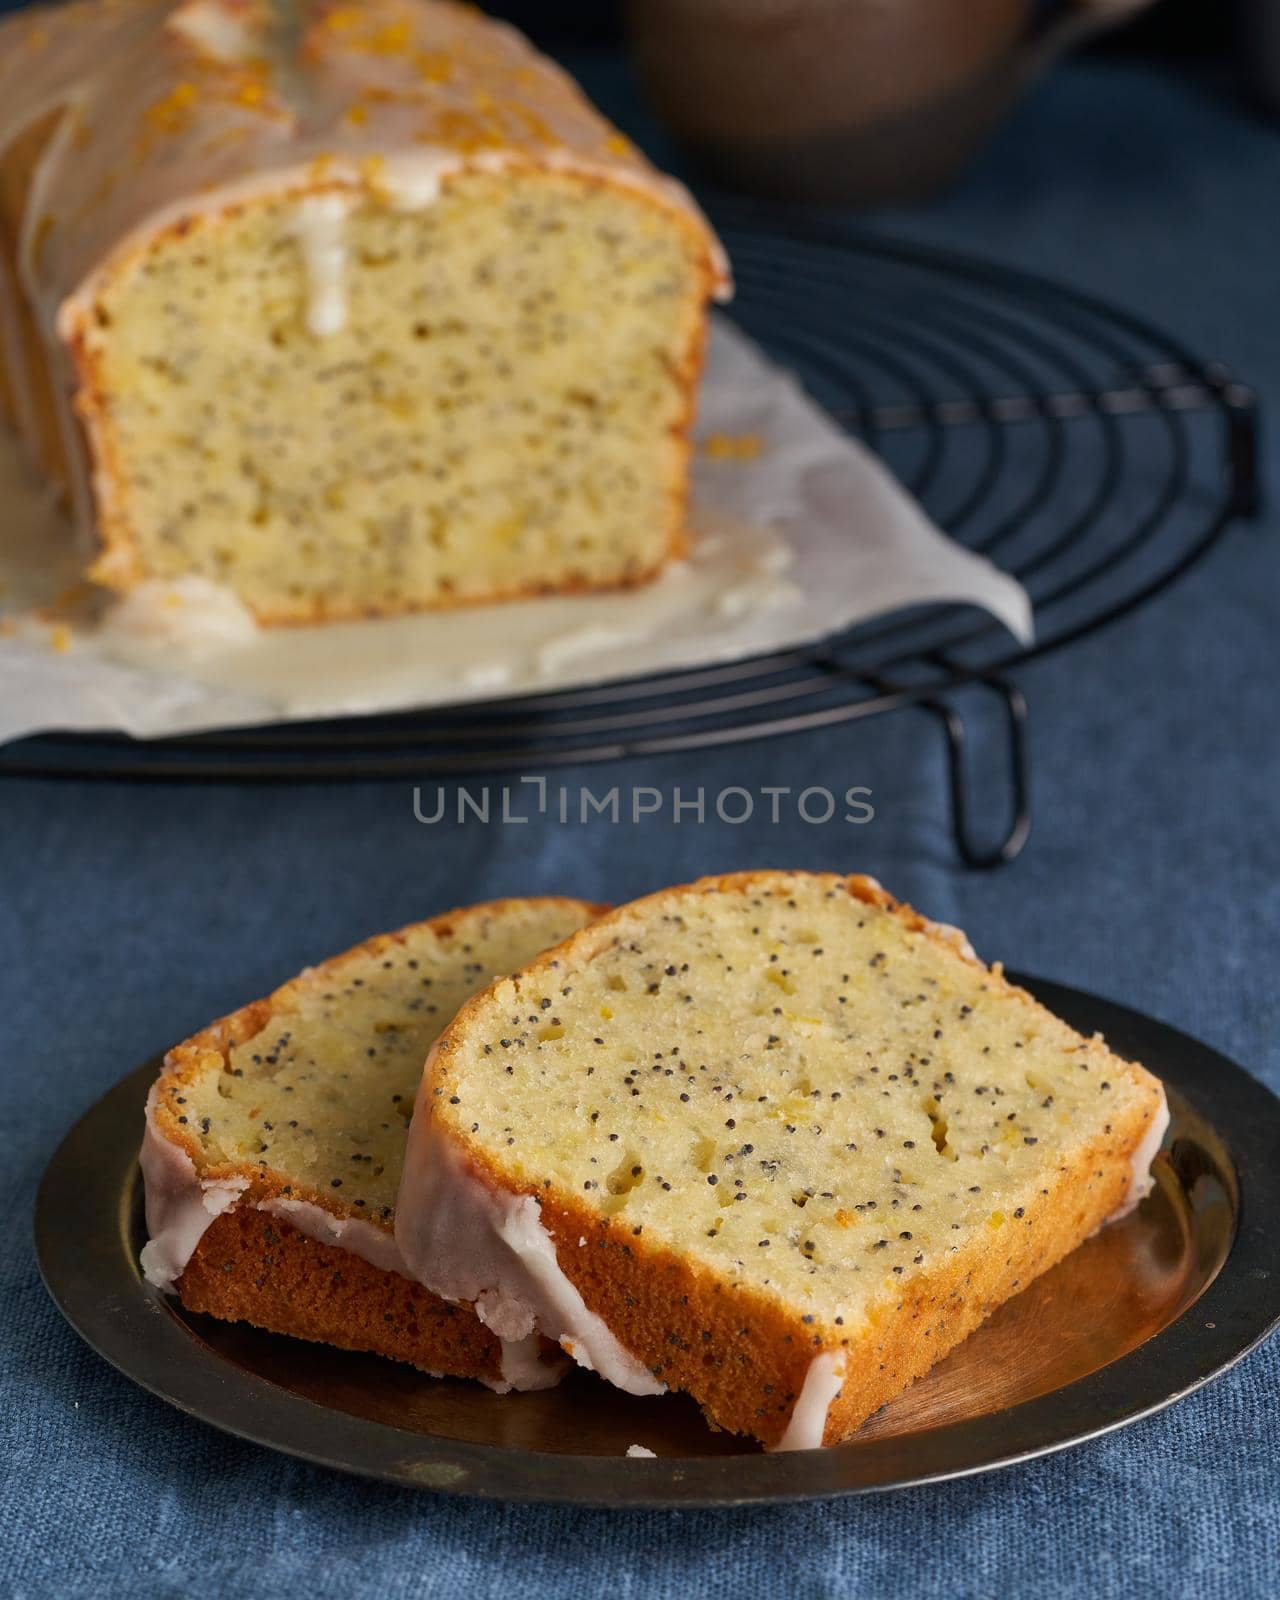 Lemon bread coated with sugar sweet icing and sprinkled with lemon peel by NataBene